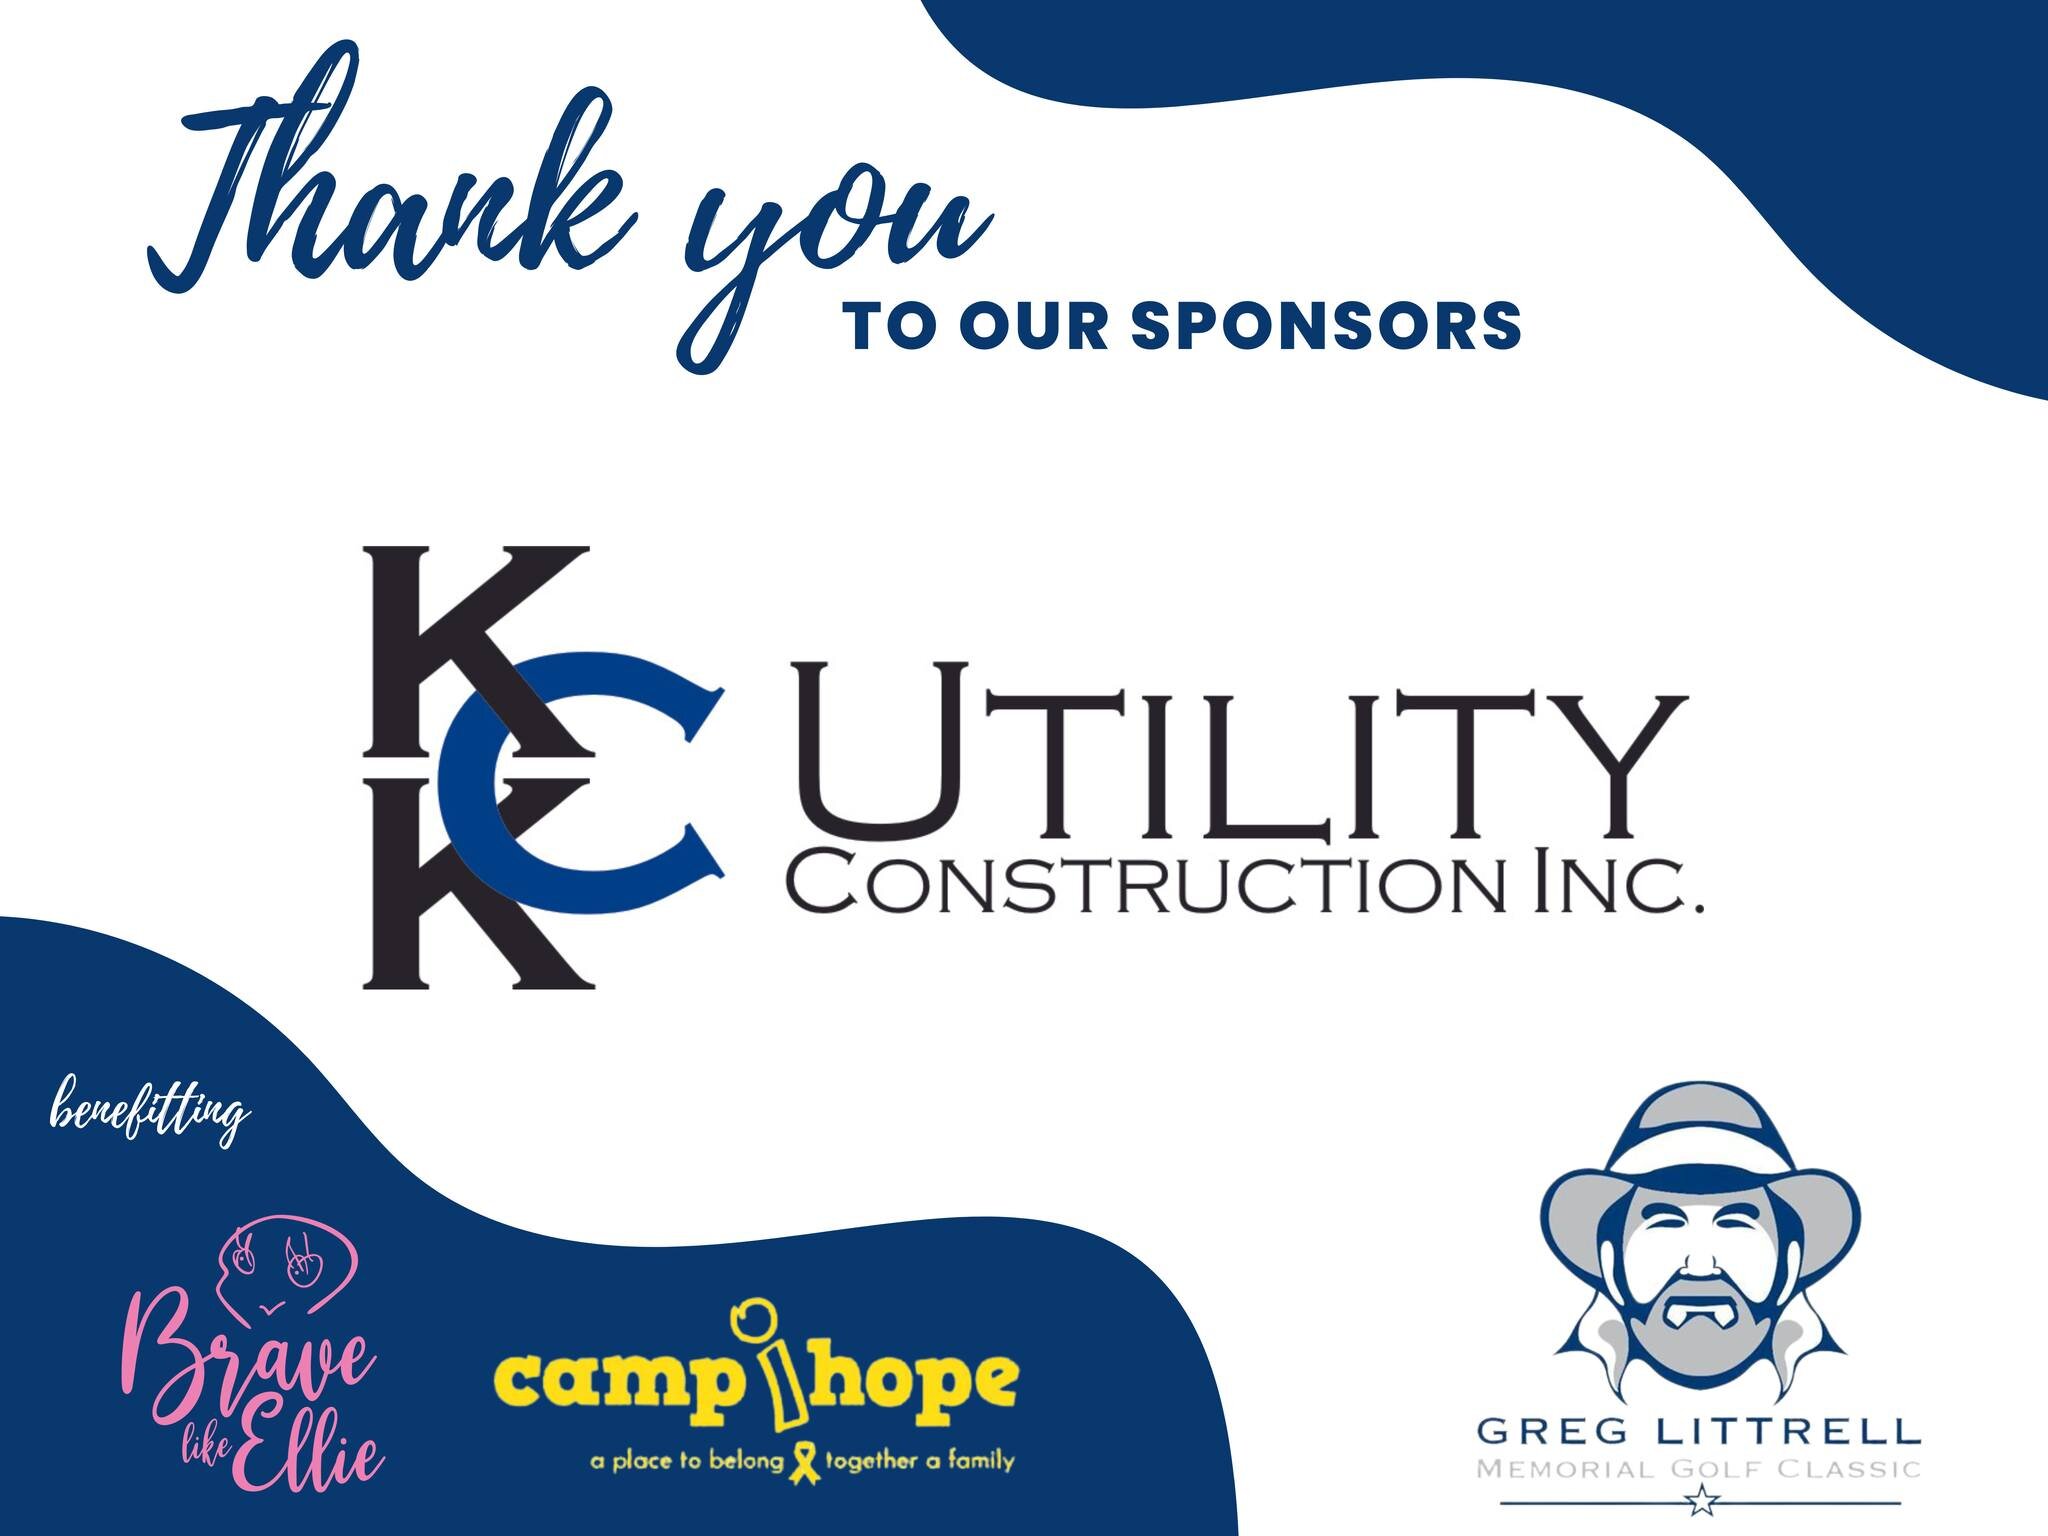 Thank you KCK Construction, Inc. for sponsoring THE Greg Littrell Golf Classic!! 

We are honored to be a beneficiary of this event! We are so thankful for your sponsorship!

EVENT PAGE LINK IN BIO

#GregLittrellGolfClassic #6thAnnualGregLittrellGolf